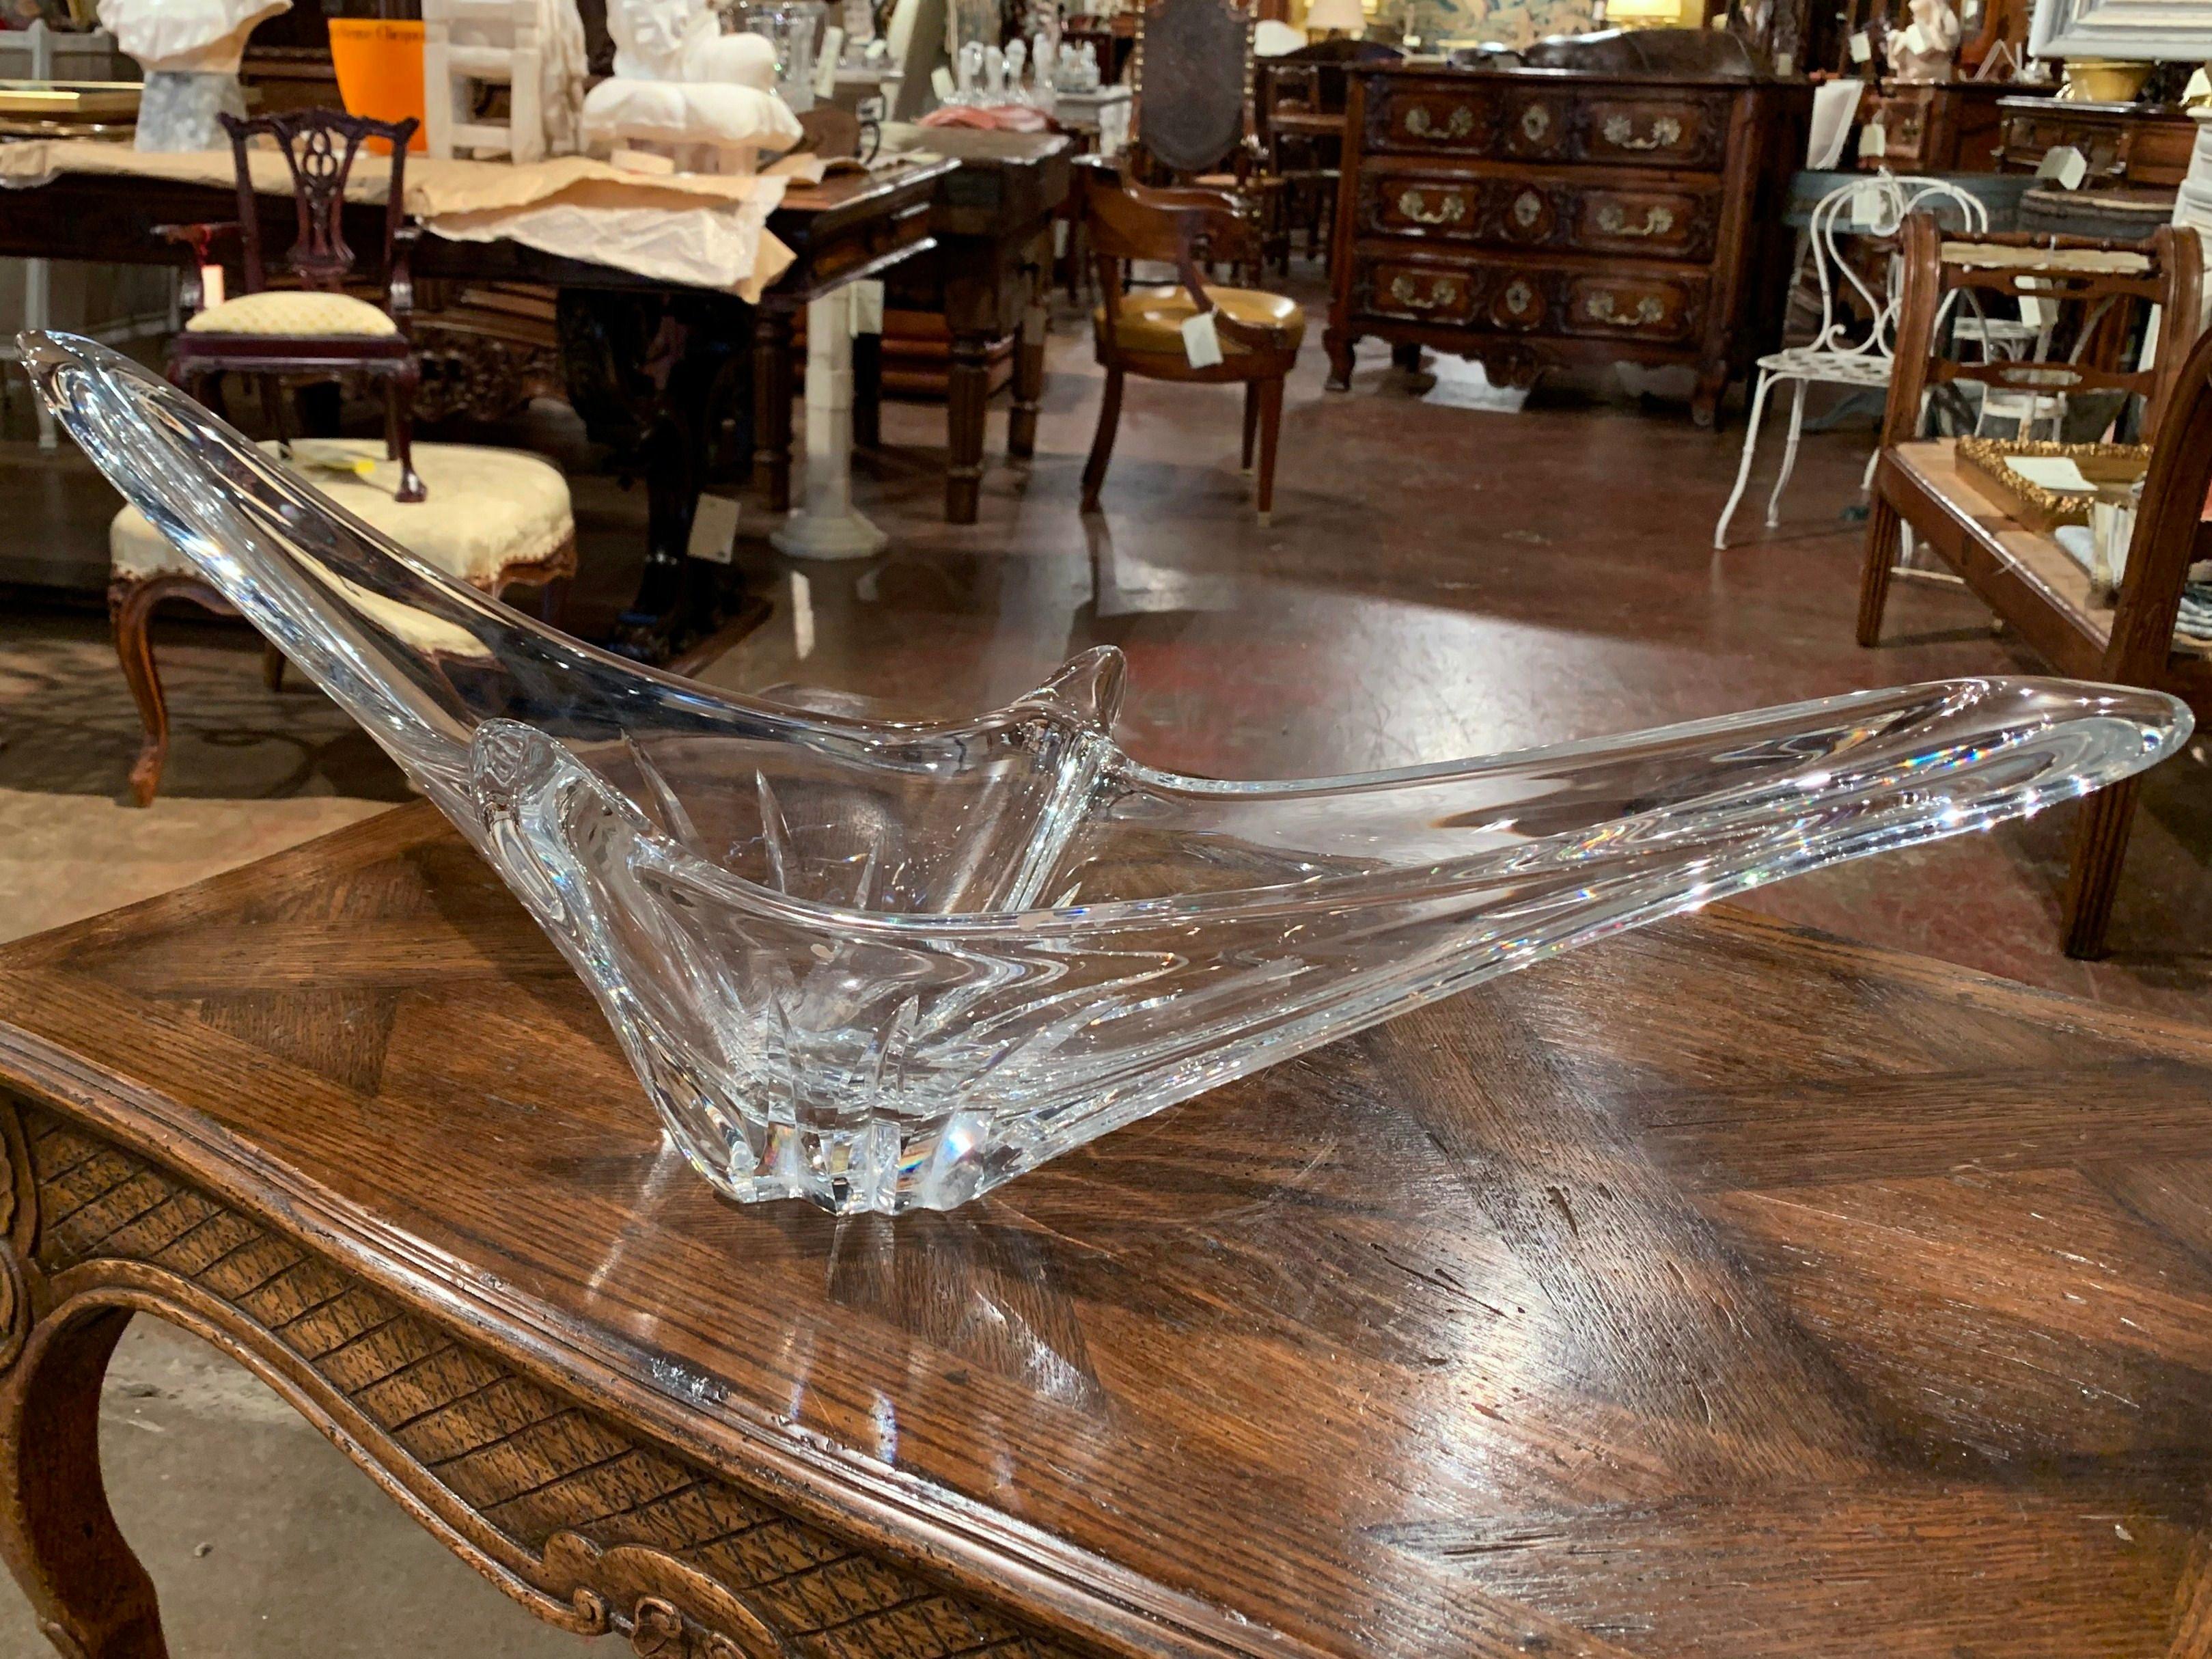 This elegant, hand blown glass console vase was crafted in France, circa 1950. The large vintage piece features a pulled feathered technique with an intricate elongated design. The wide traditional center piece is in excellent condition with